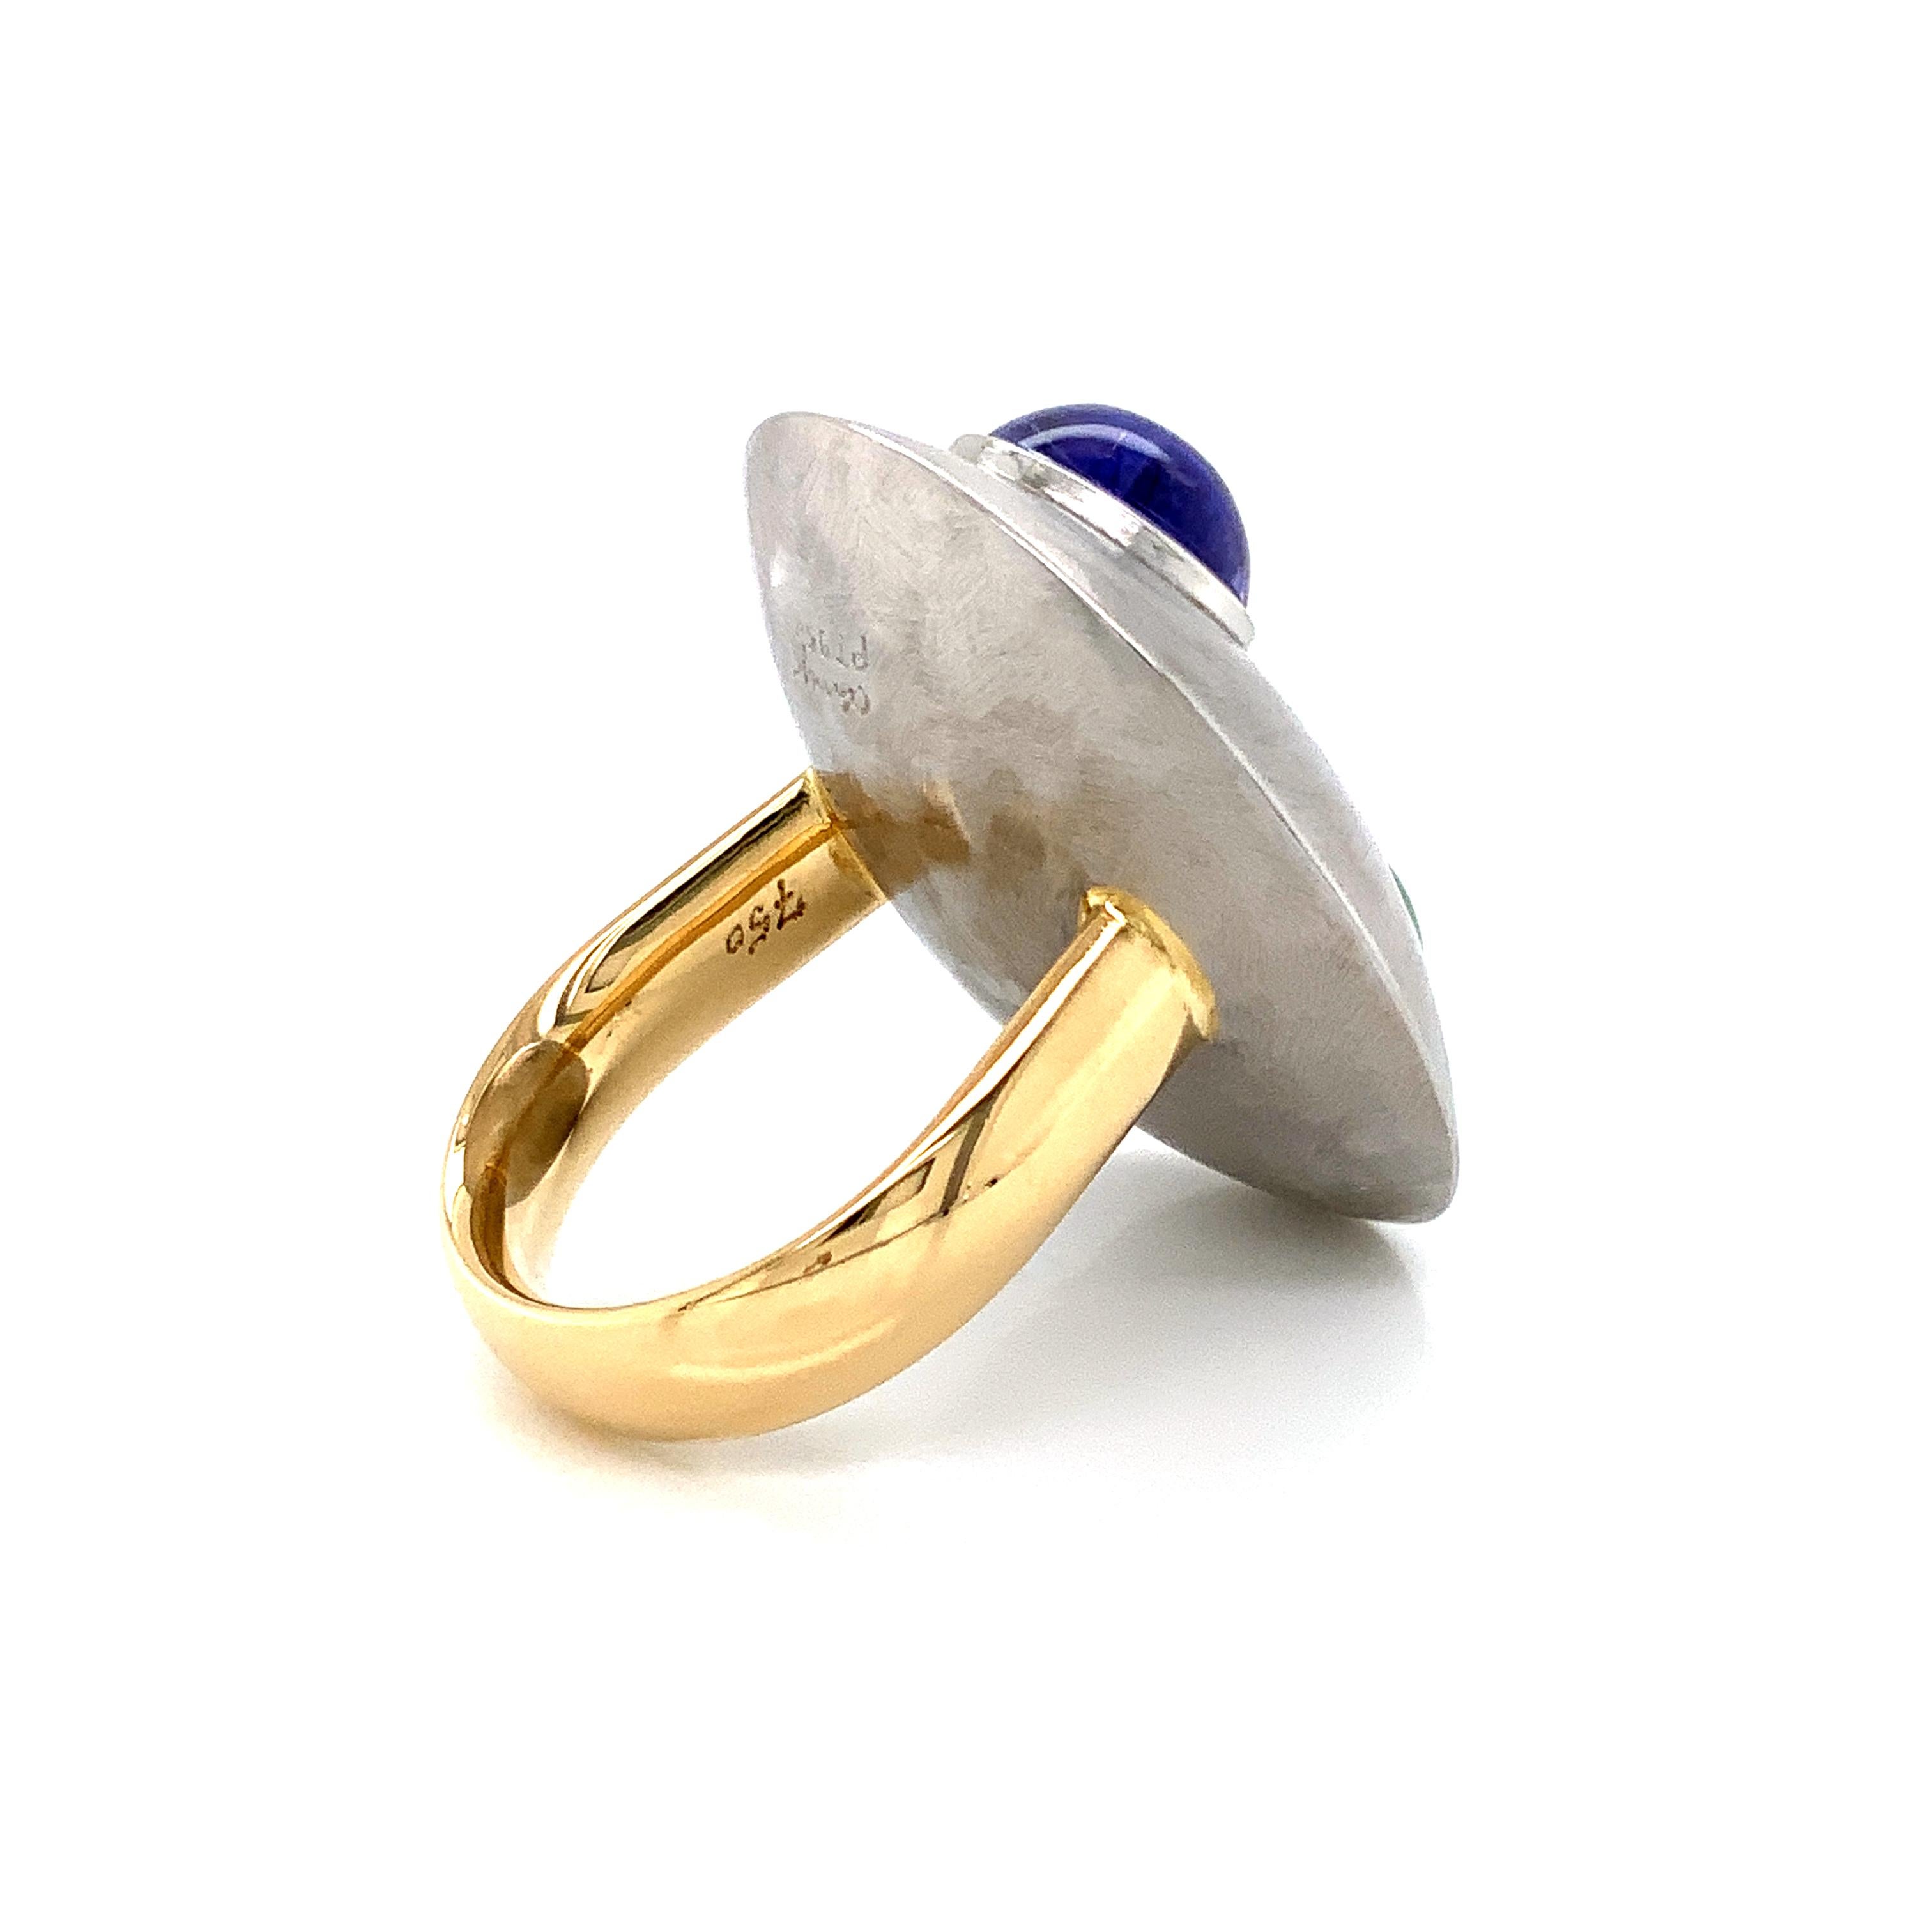  Georg Spreng - Sunny Side Ring Platinum 950 Tourmaline Yellow, Tanzanite blue In New Condition For Sale In Waldstetten, DE